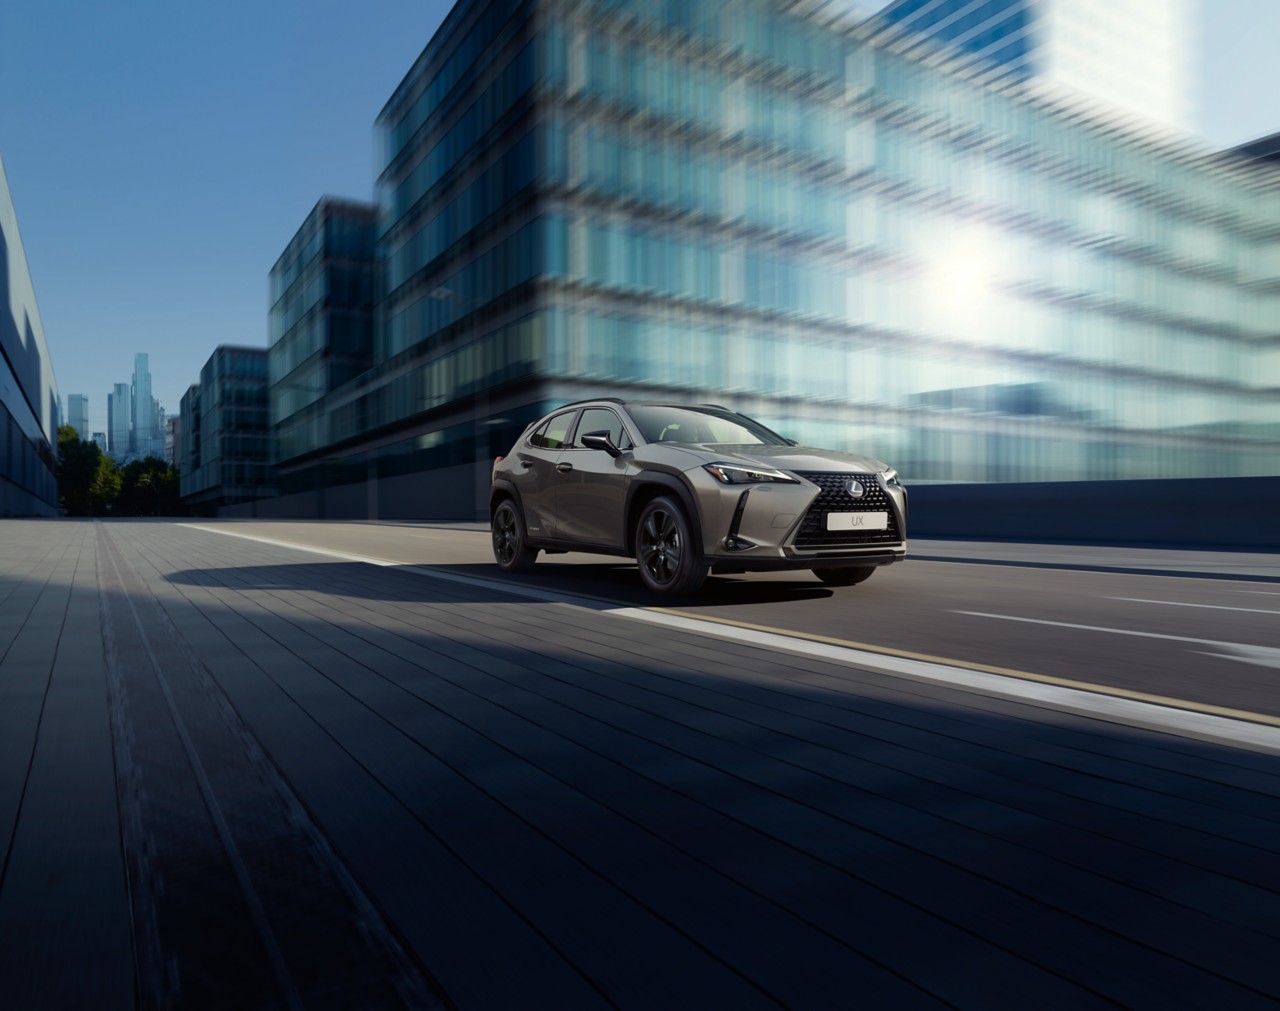 A Lexus UX driving in a city 